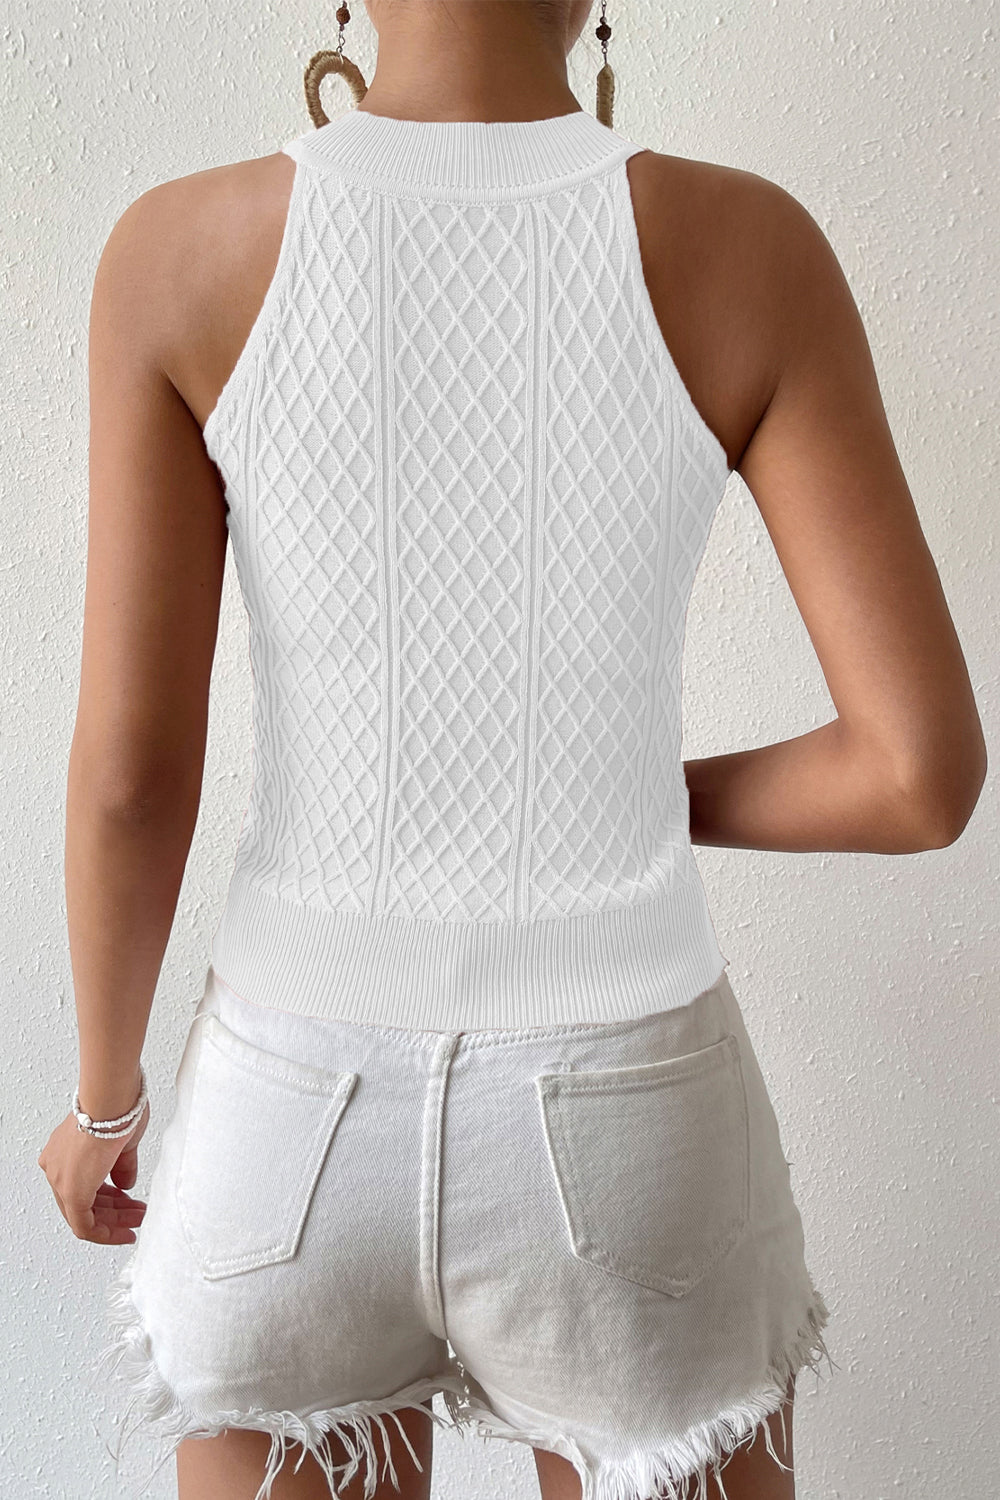 Round Neck Sleeveless Knit Top - Tops & Tees - Shirts & Tops - 6 - 2024